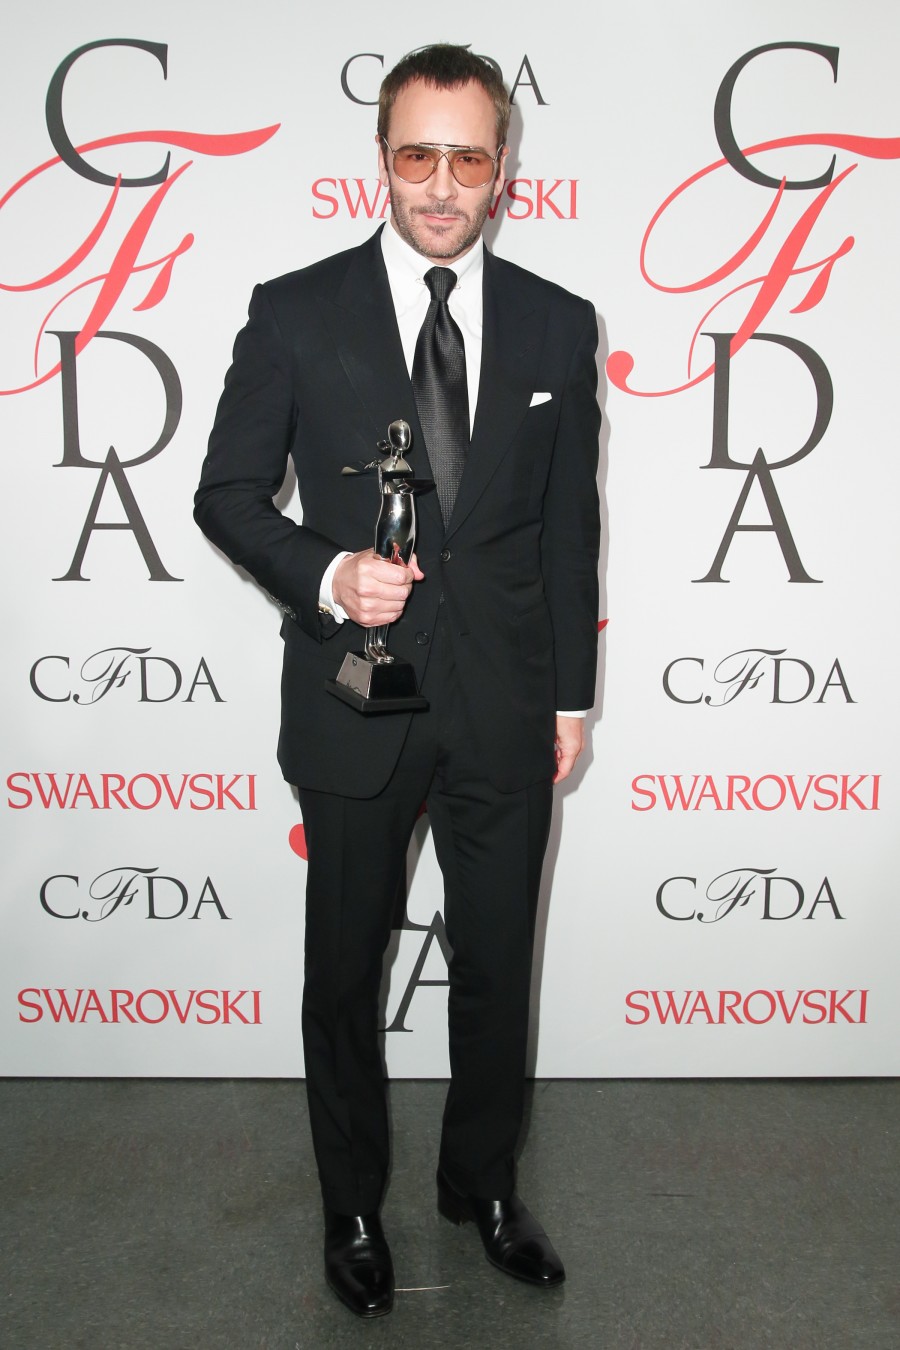 The 2015 CFDA Award Winners: Who Scored Last Night? - Daily Front Row